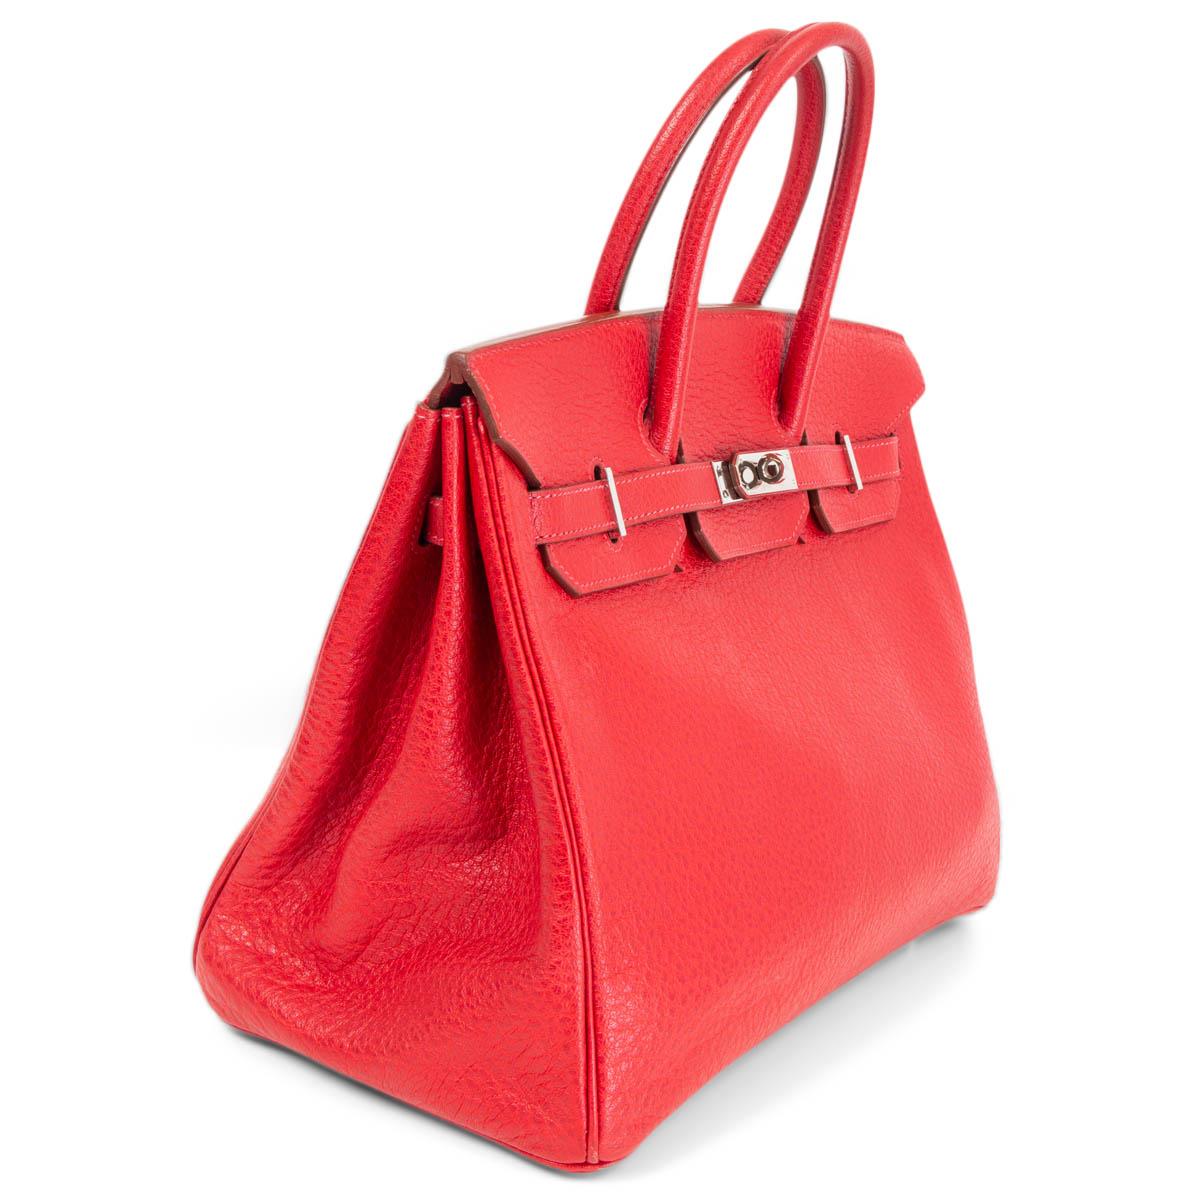 100% authentic Hermès 'Birkin 35' bag in Rouge Vif (true red) Skipper leather with palladium hardware. Lined in Chevre (goat skin) with an open pocket against the front and a zipper pocket against the back. Has been carried and and hardware shows